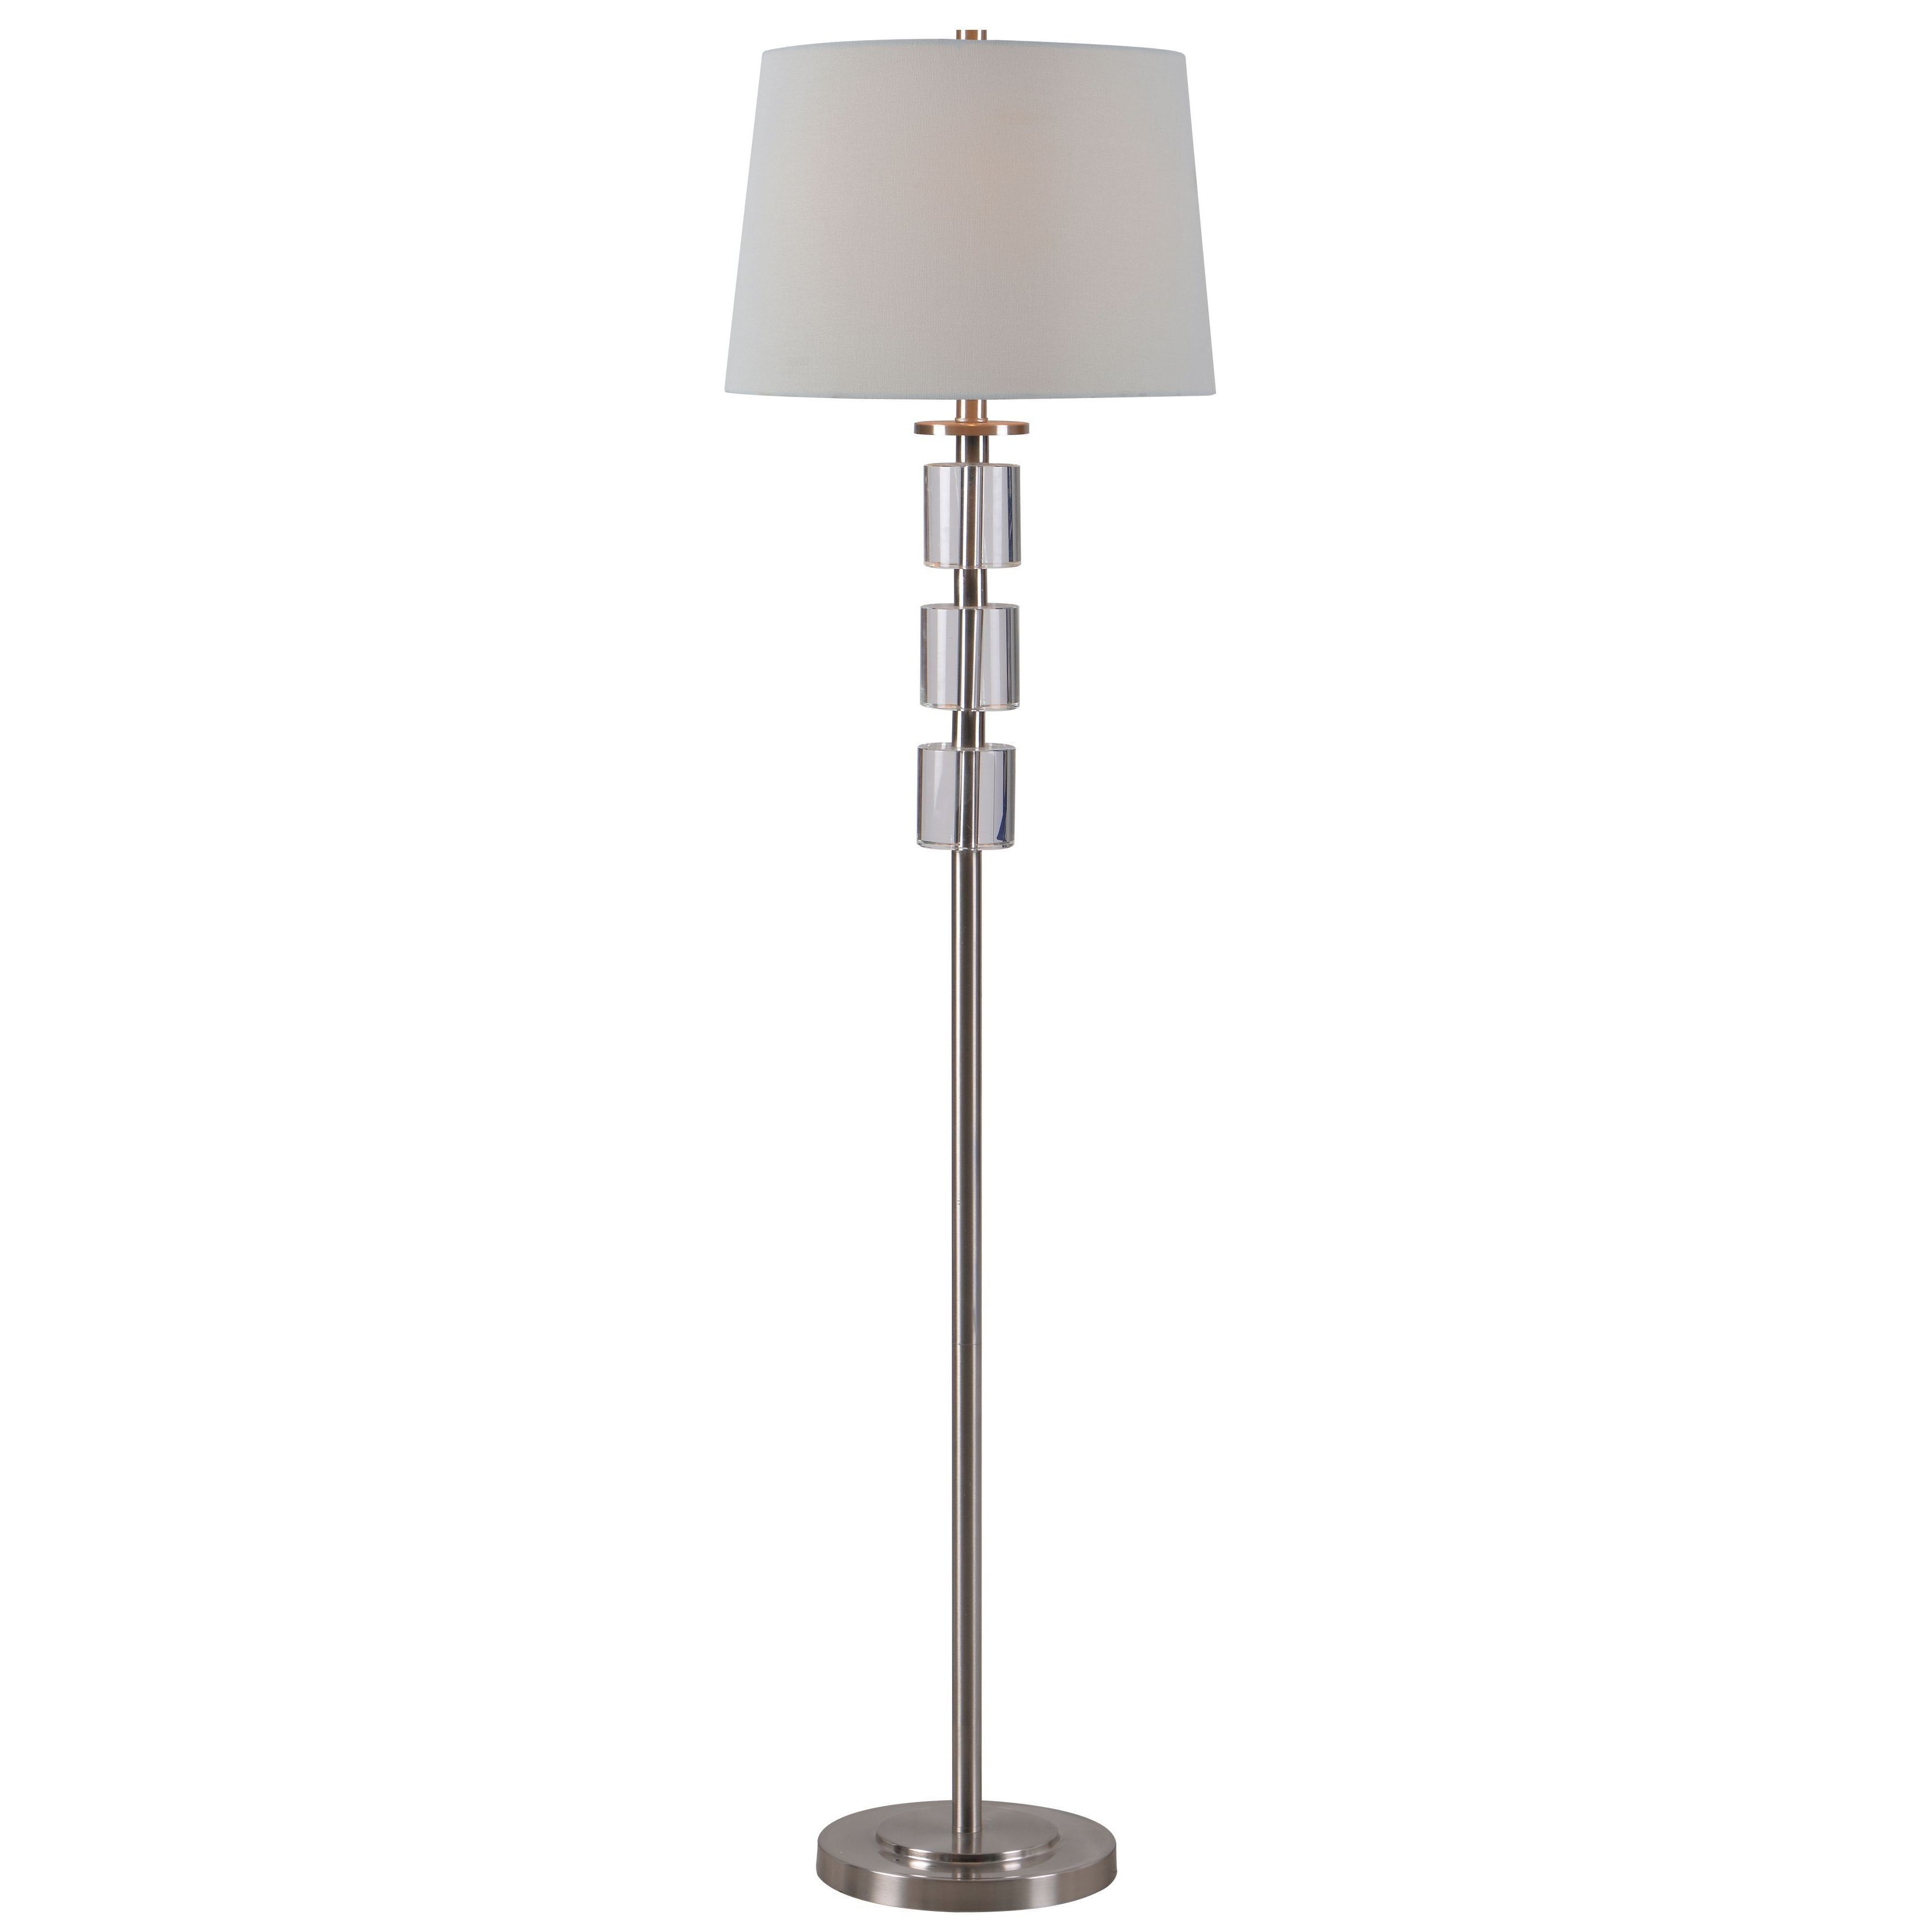 Crystal Floor Lamp Overstock Shopping The Best Deals throughout dimensions 3500 X 3500